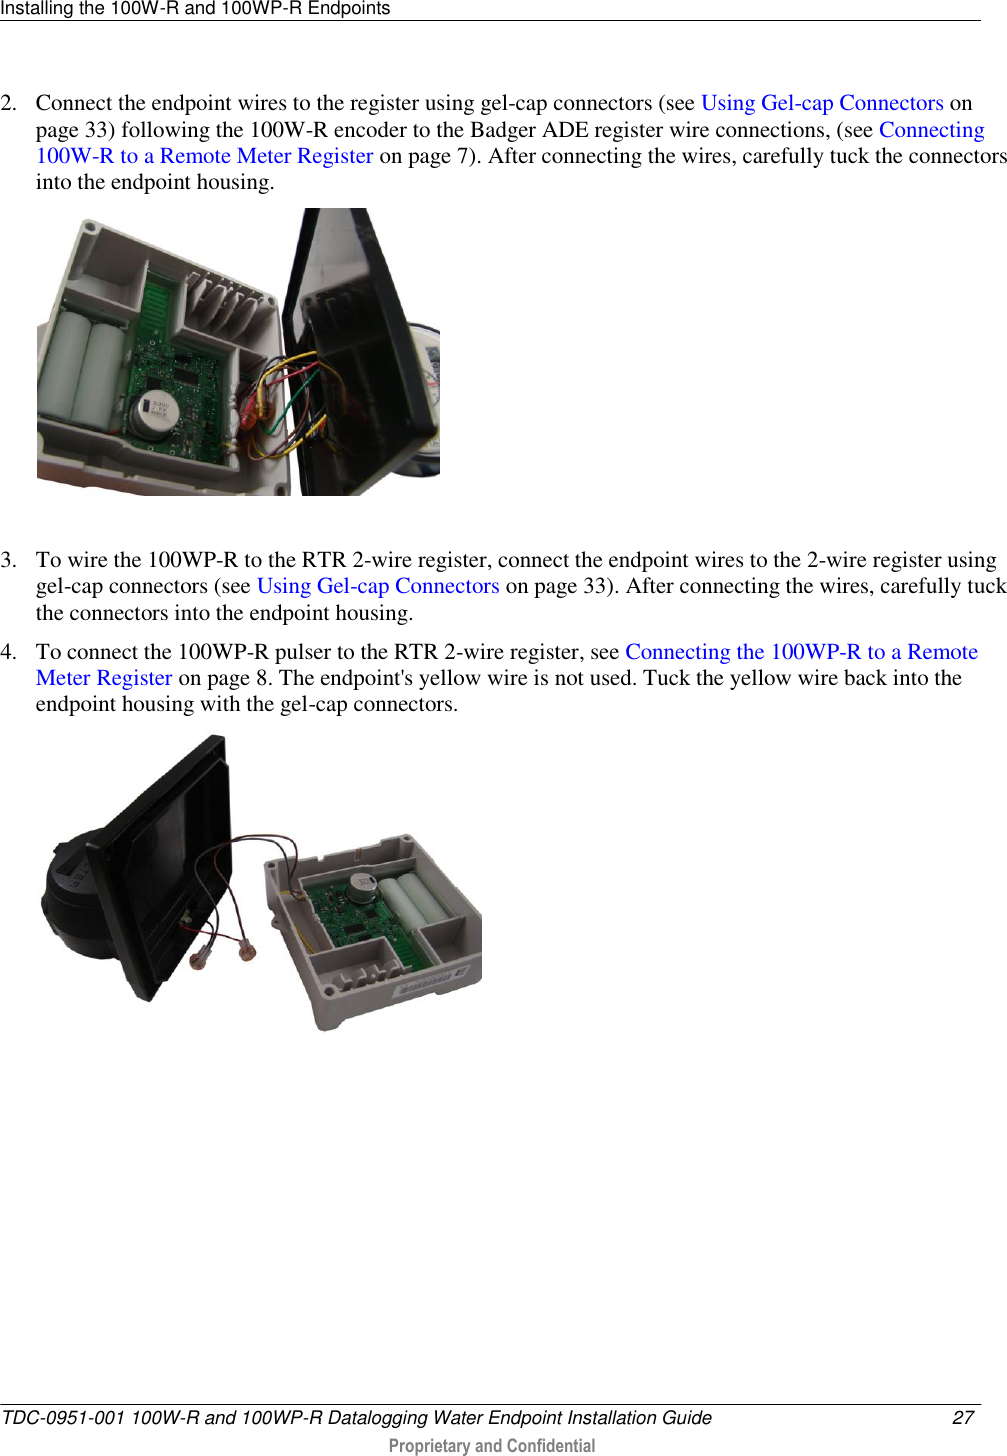 Installing the 100W-R and 100WP-R Endpoints   TDC-0951-001 100W-R and 100WP-R Datalogging Water Endpoint Installation Guide  27   Proprietary and Confidential     2. Connect the endpoint wires to the register using gel-cap connectors (see Using Gel-cap Connectors on page 33) following the 100W-R encoder to the Badger ADE register wire connections, (see Connecting 100W-R to a Remote Meter Register on page 7). After connecting the wires, carefully tuck the connectors into the endpoint housing.    3. To wire the 100WP-R to the RTR 2-wire register, connect the endpoint wires to the 2-wire register using gel-cap connectors (see Using Gel-cap Connectors on page 33). After connecting the wires, carefully tuck the connectors into the endpoint housing.  4. To connect the 100WP-R pulser to the RTR 2-wire register, see Connecting the 100WP-R to a Remote Meter Register on page 8. The endpoint&apos;s yellow wire is not used. Tuck the yellow wire back into the endpoint housing with the gel-cap connectors.   